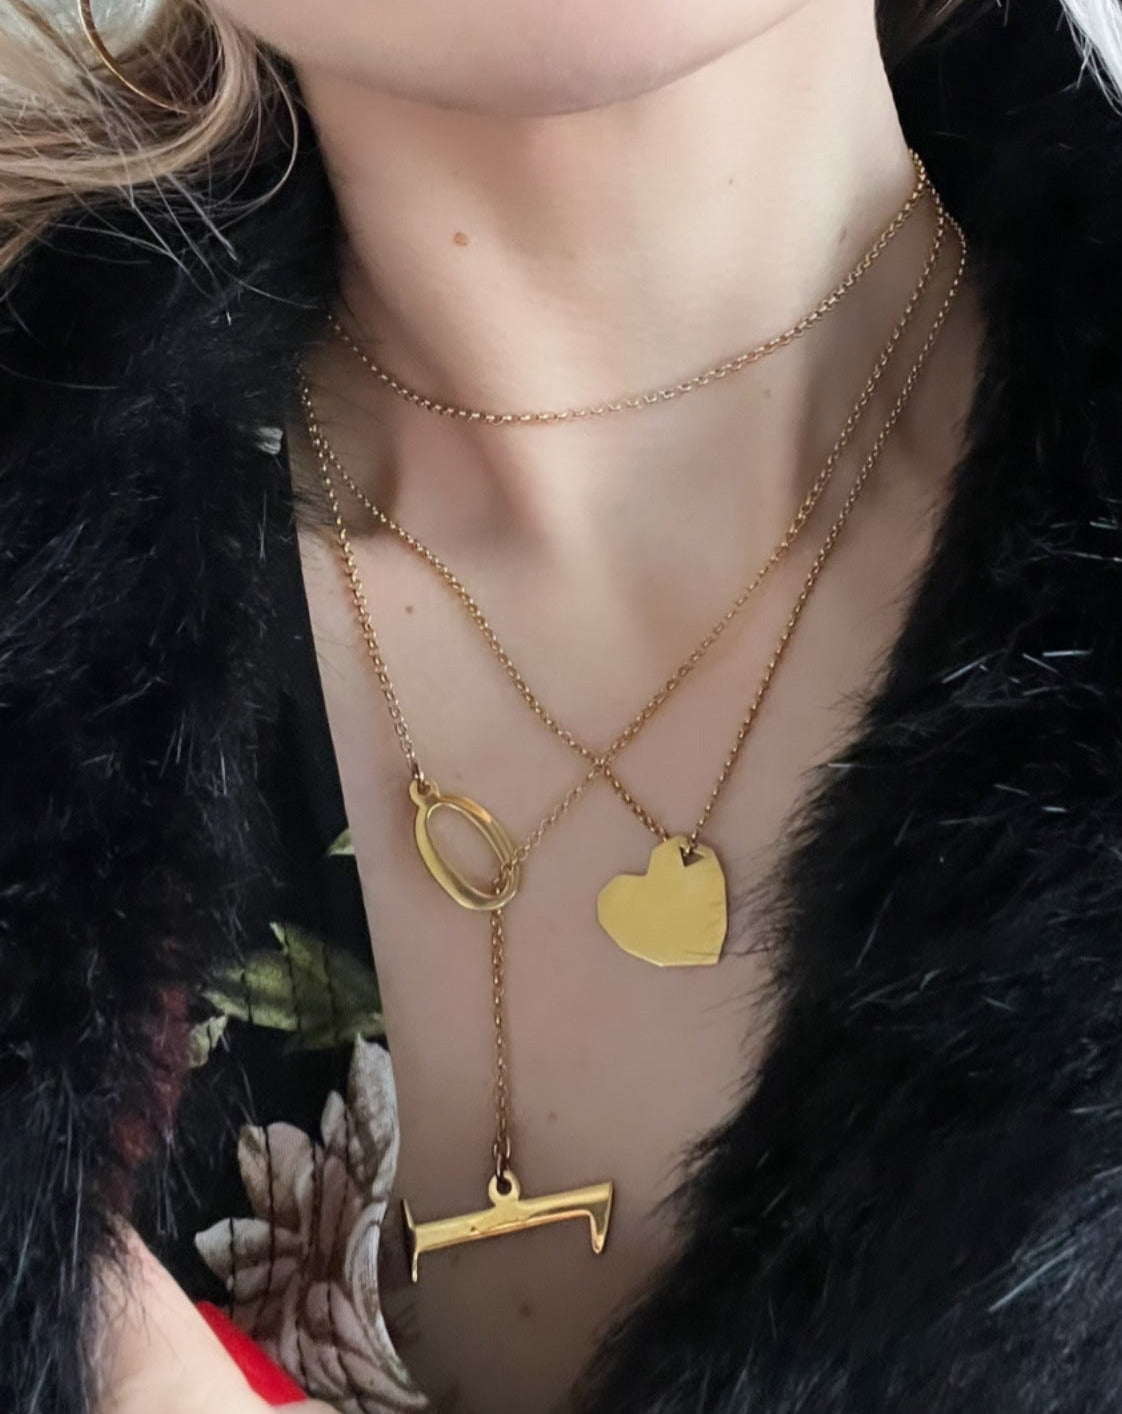 Long slip-through necklace with Zero and One pendants from Numbers collection. The chain is long enough to be wrapped around the neck twice and the item can be worn as long necklace or a choker with a pendant.   Material: 18 karat gold-plated 925 silver.  Size: 90cm.